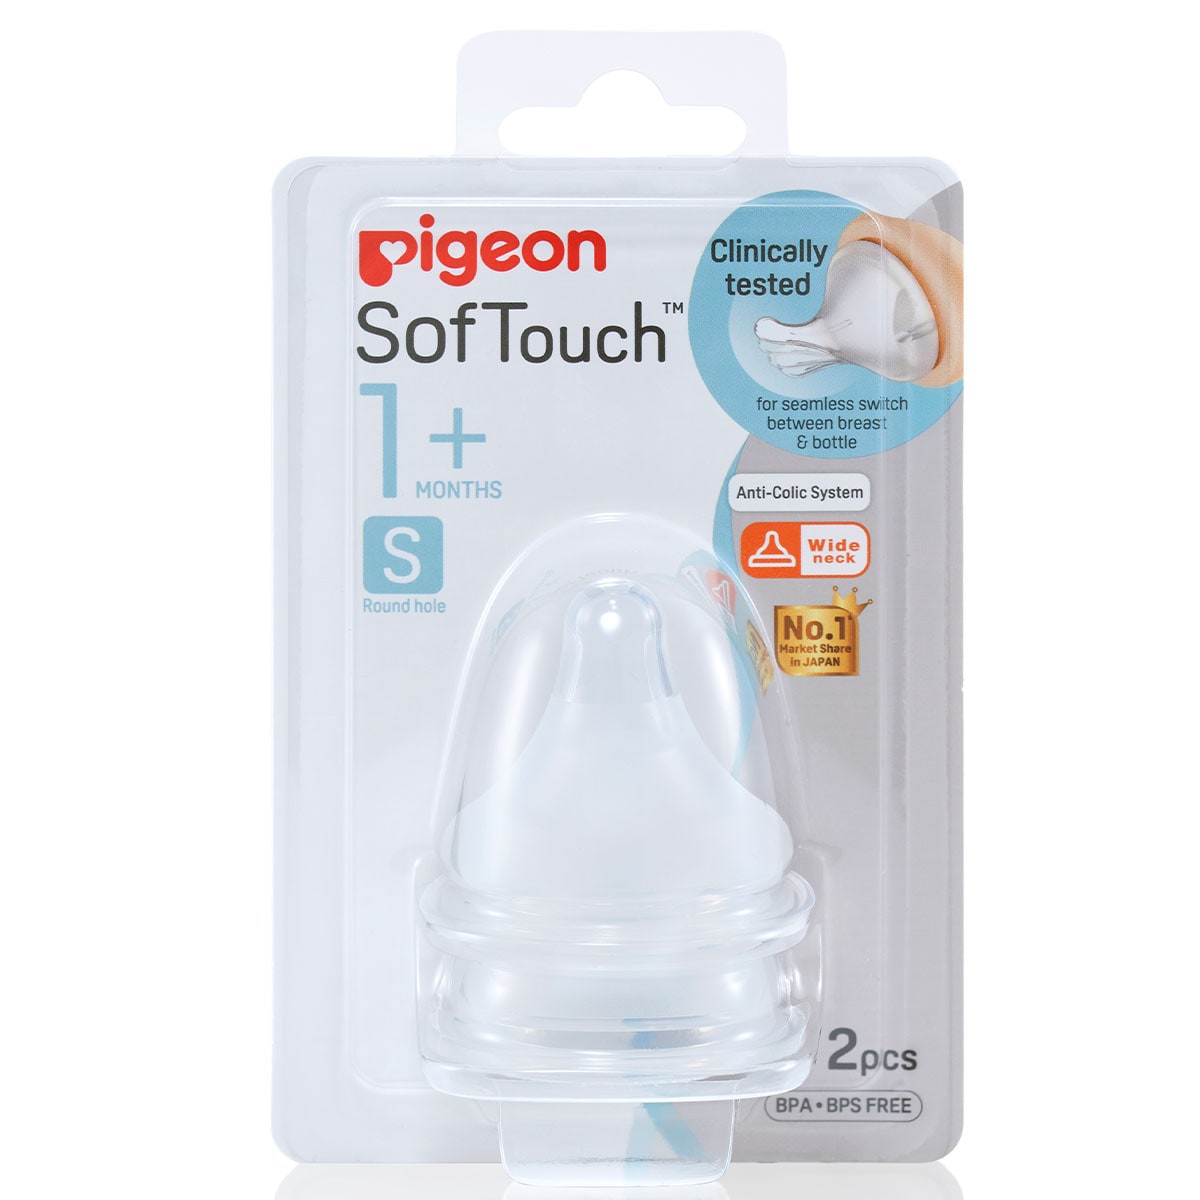 Pigeon SofTouch Peristaltic Plus Teat (S) 2 Pieces